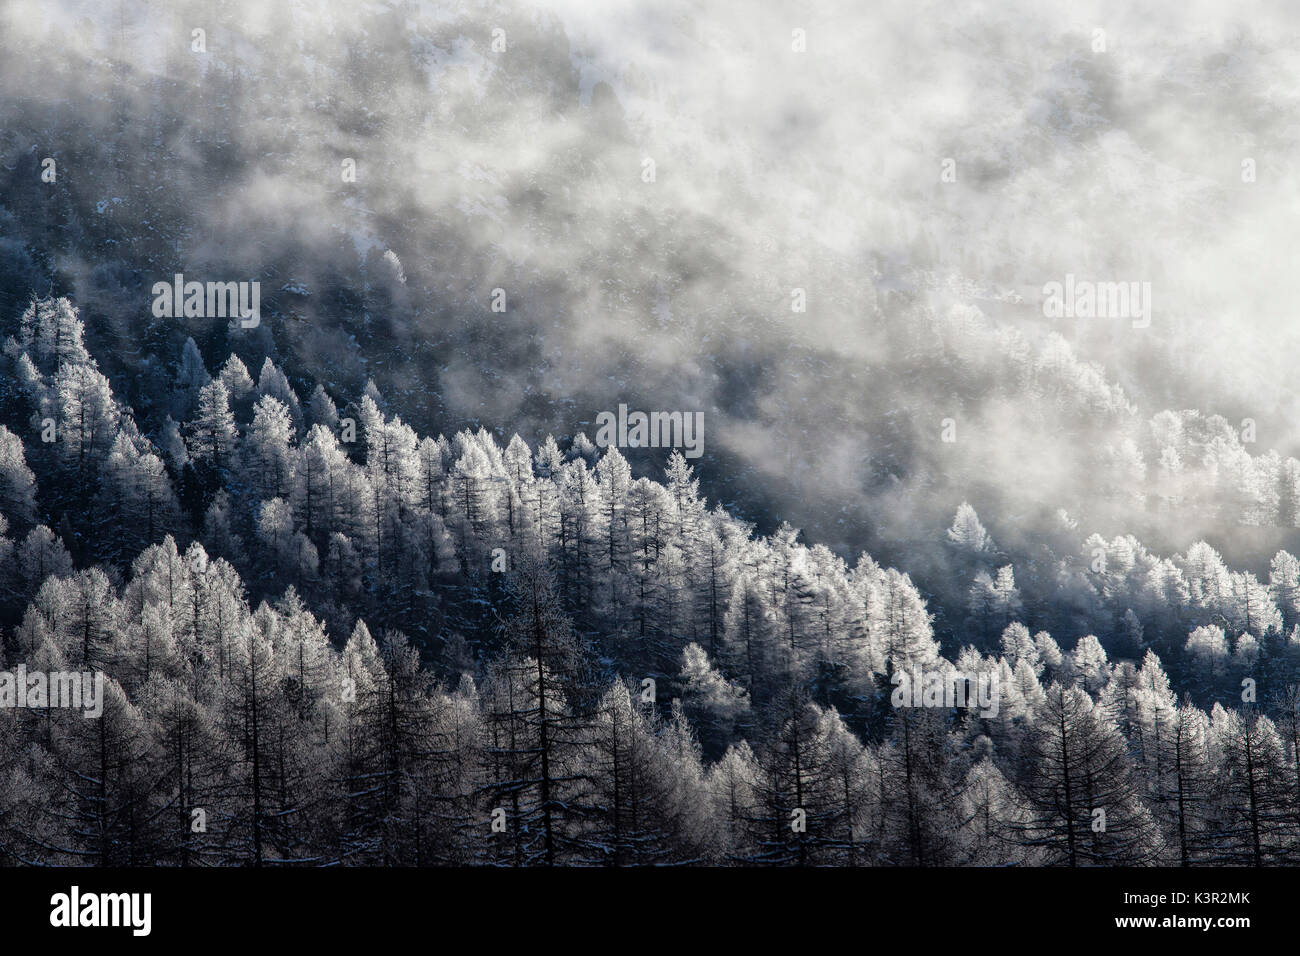 Frozen larches in the woods surrounded by low clouds Bernina Pass Engadine Canton of Graubünden Switzerland Europe Stock Photo